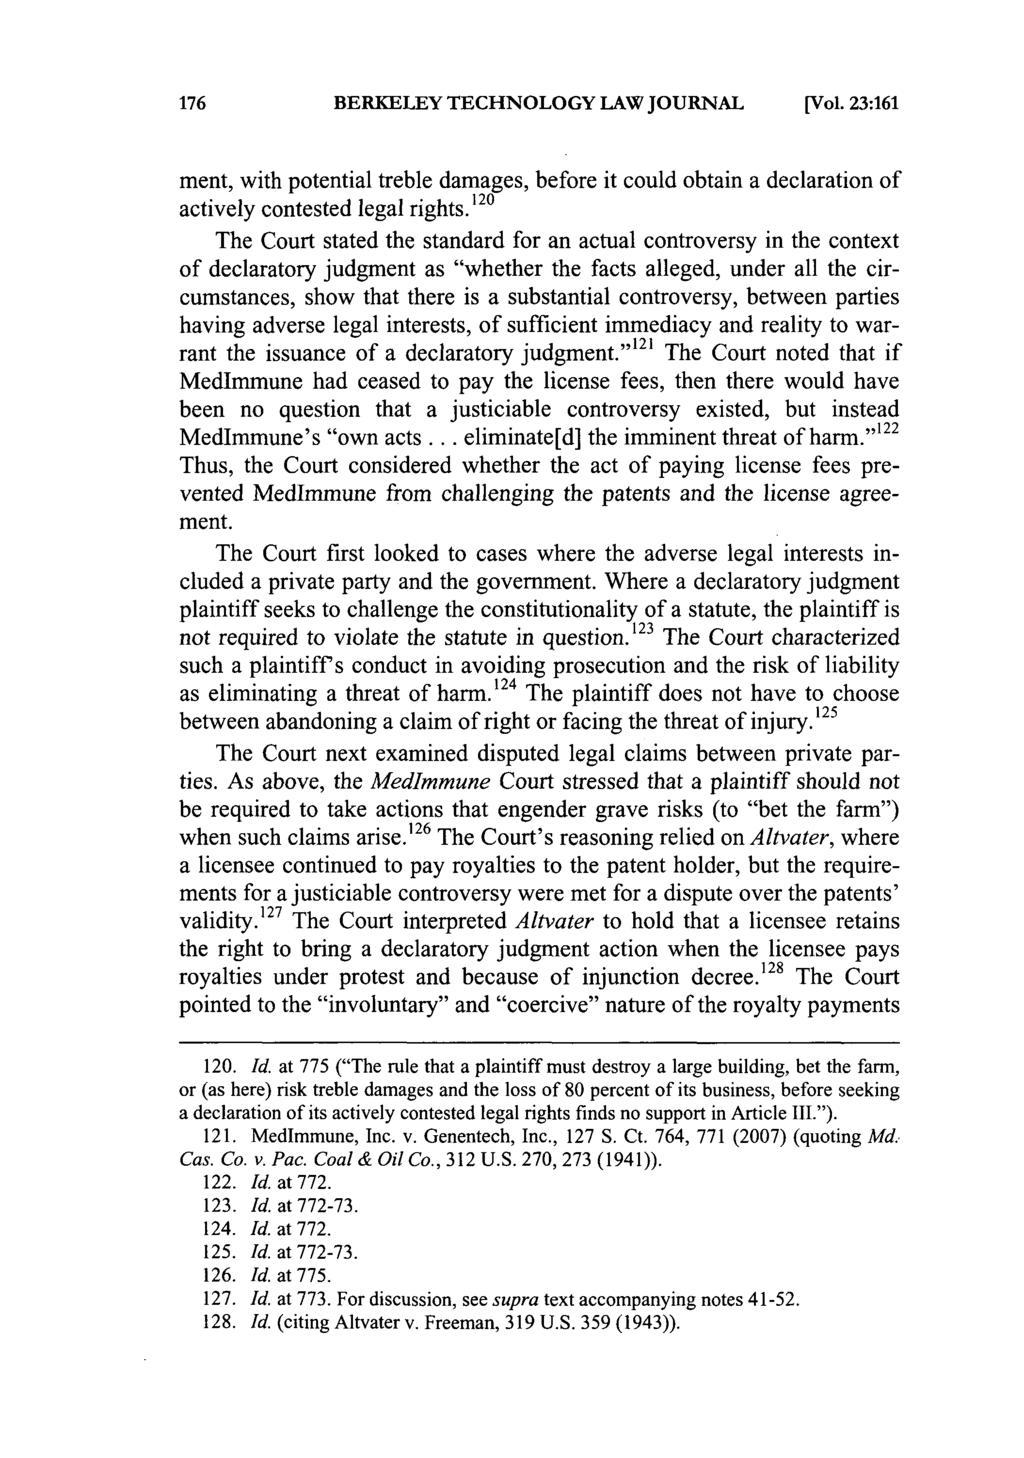 BERKELEY TECHNOLOGY LAW JOURNAL [Vol. 23:161 ment, with potential treble damages, before it could obtain a declaration of actively contested legal rights.